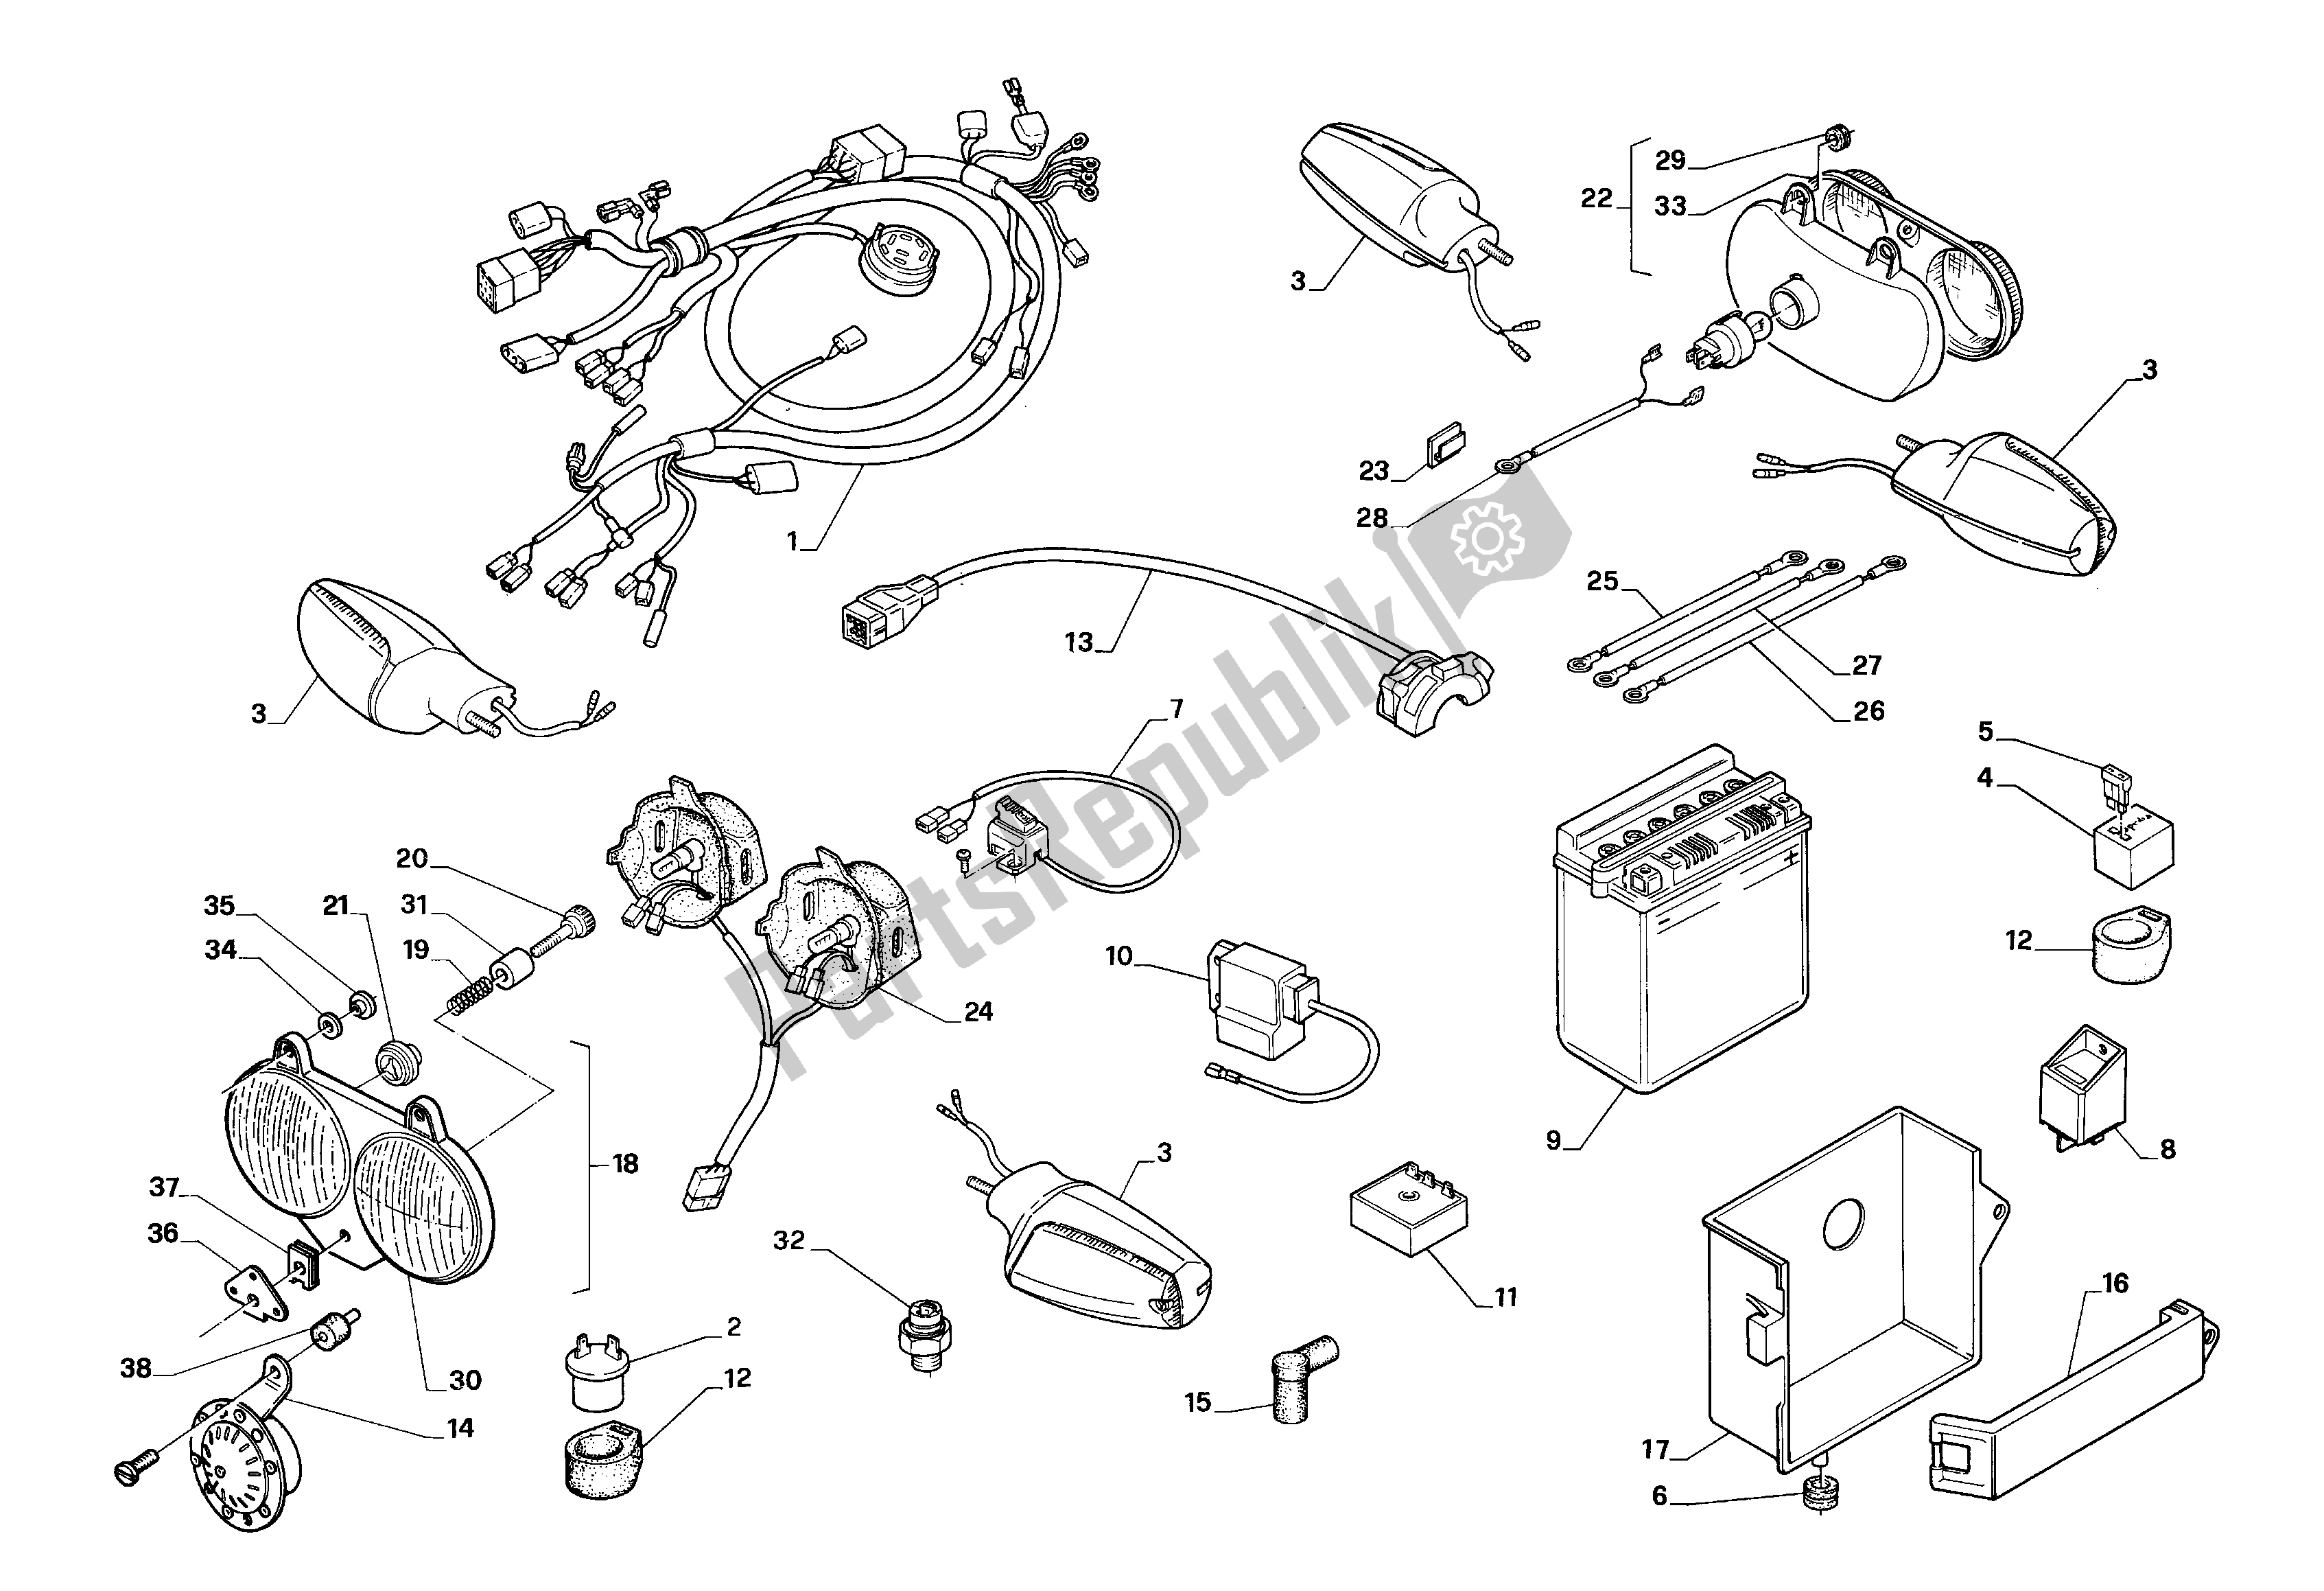 All parts for the Electrical System of the Aprilia AF1 50 1989